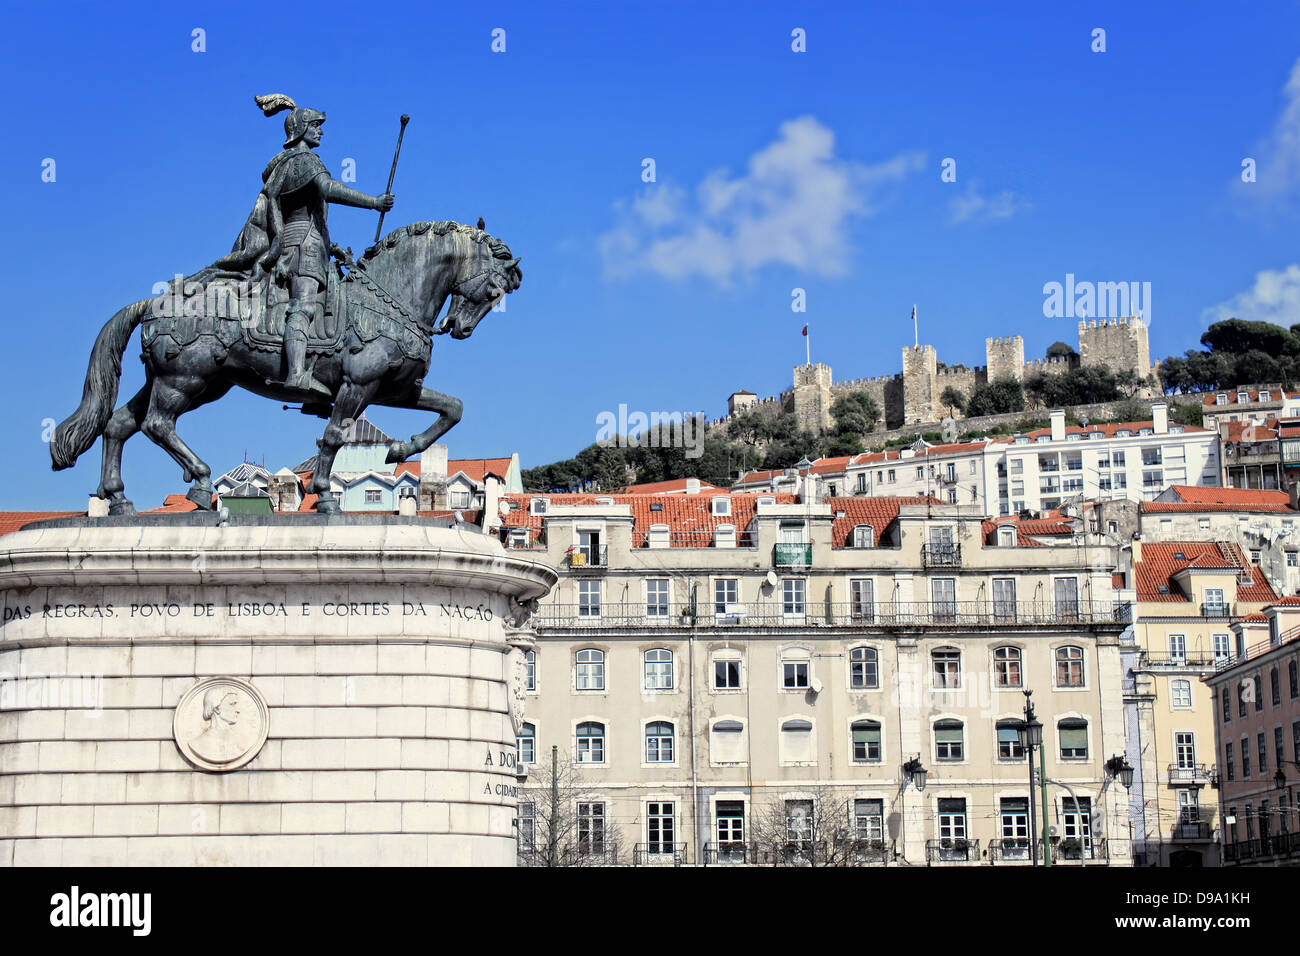 Statue of Joao I, with Sao Jorge castle in the background in Praca da Figueira, Lisbon Portugal Stock Photo